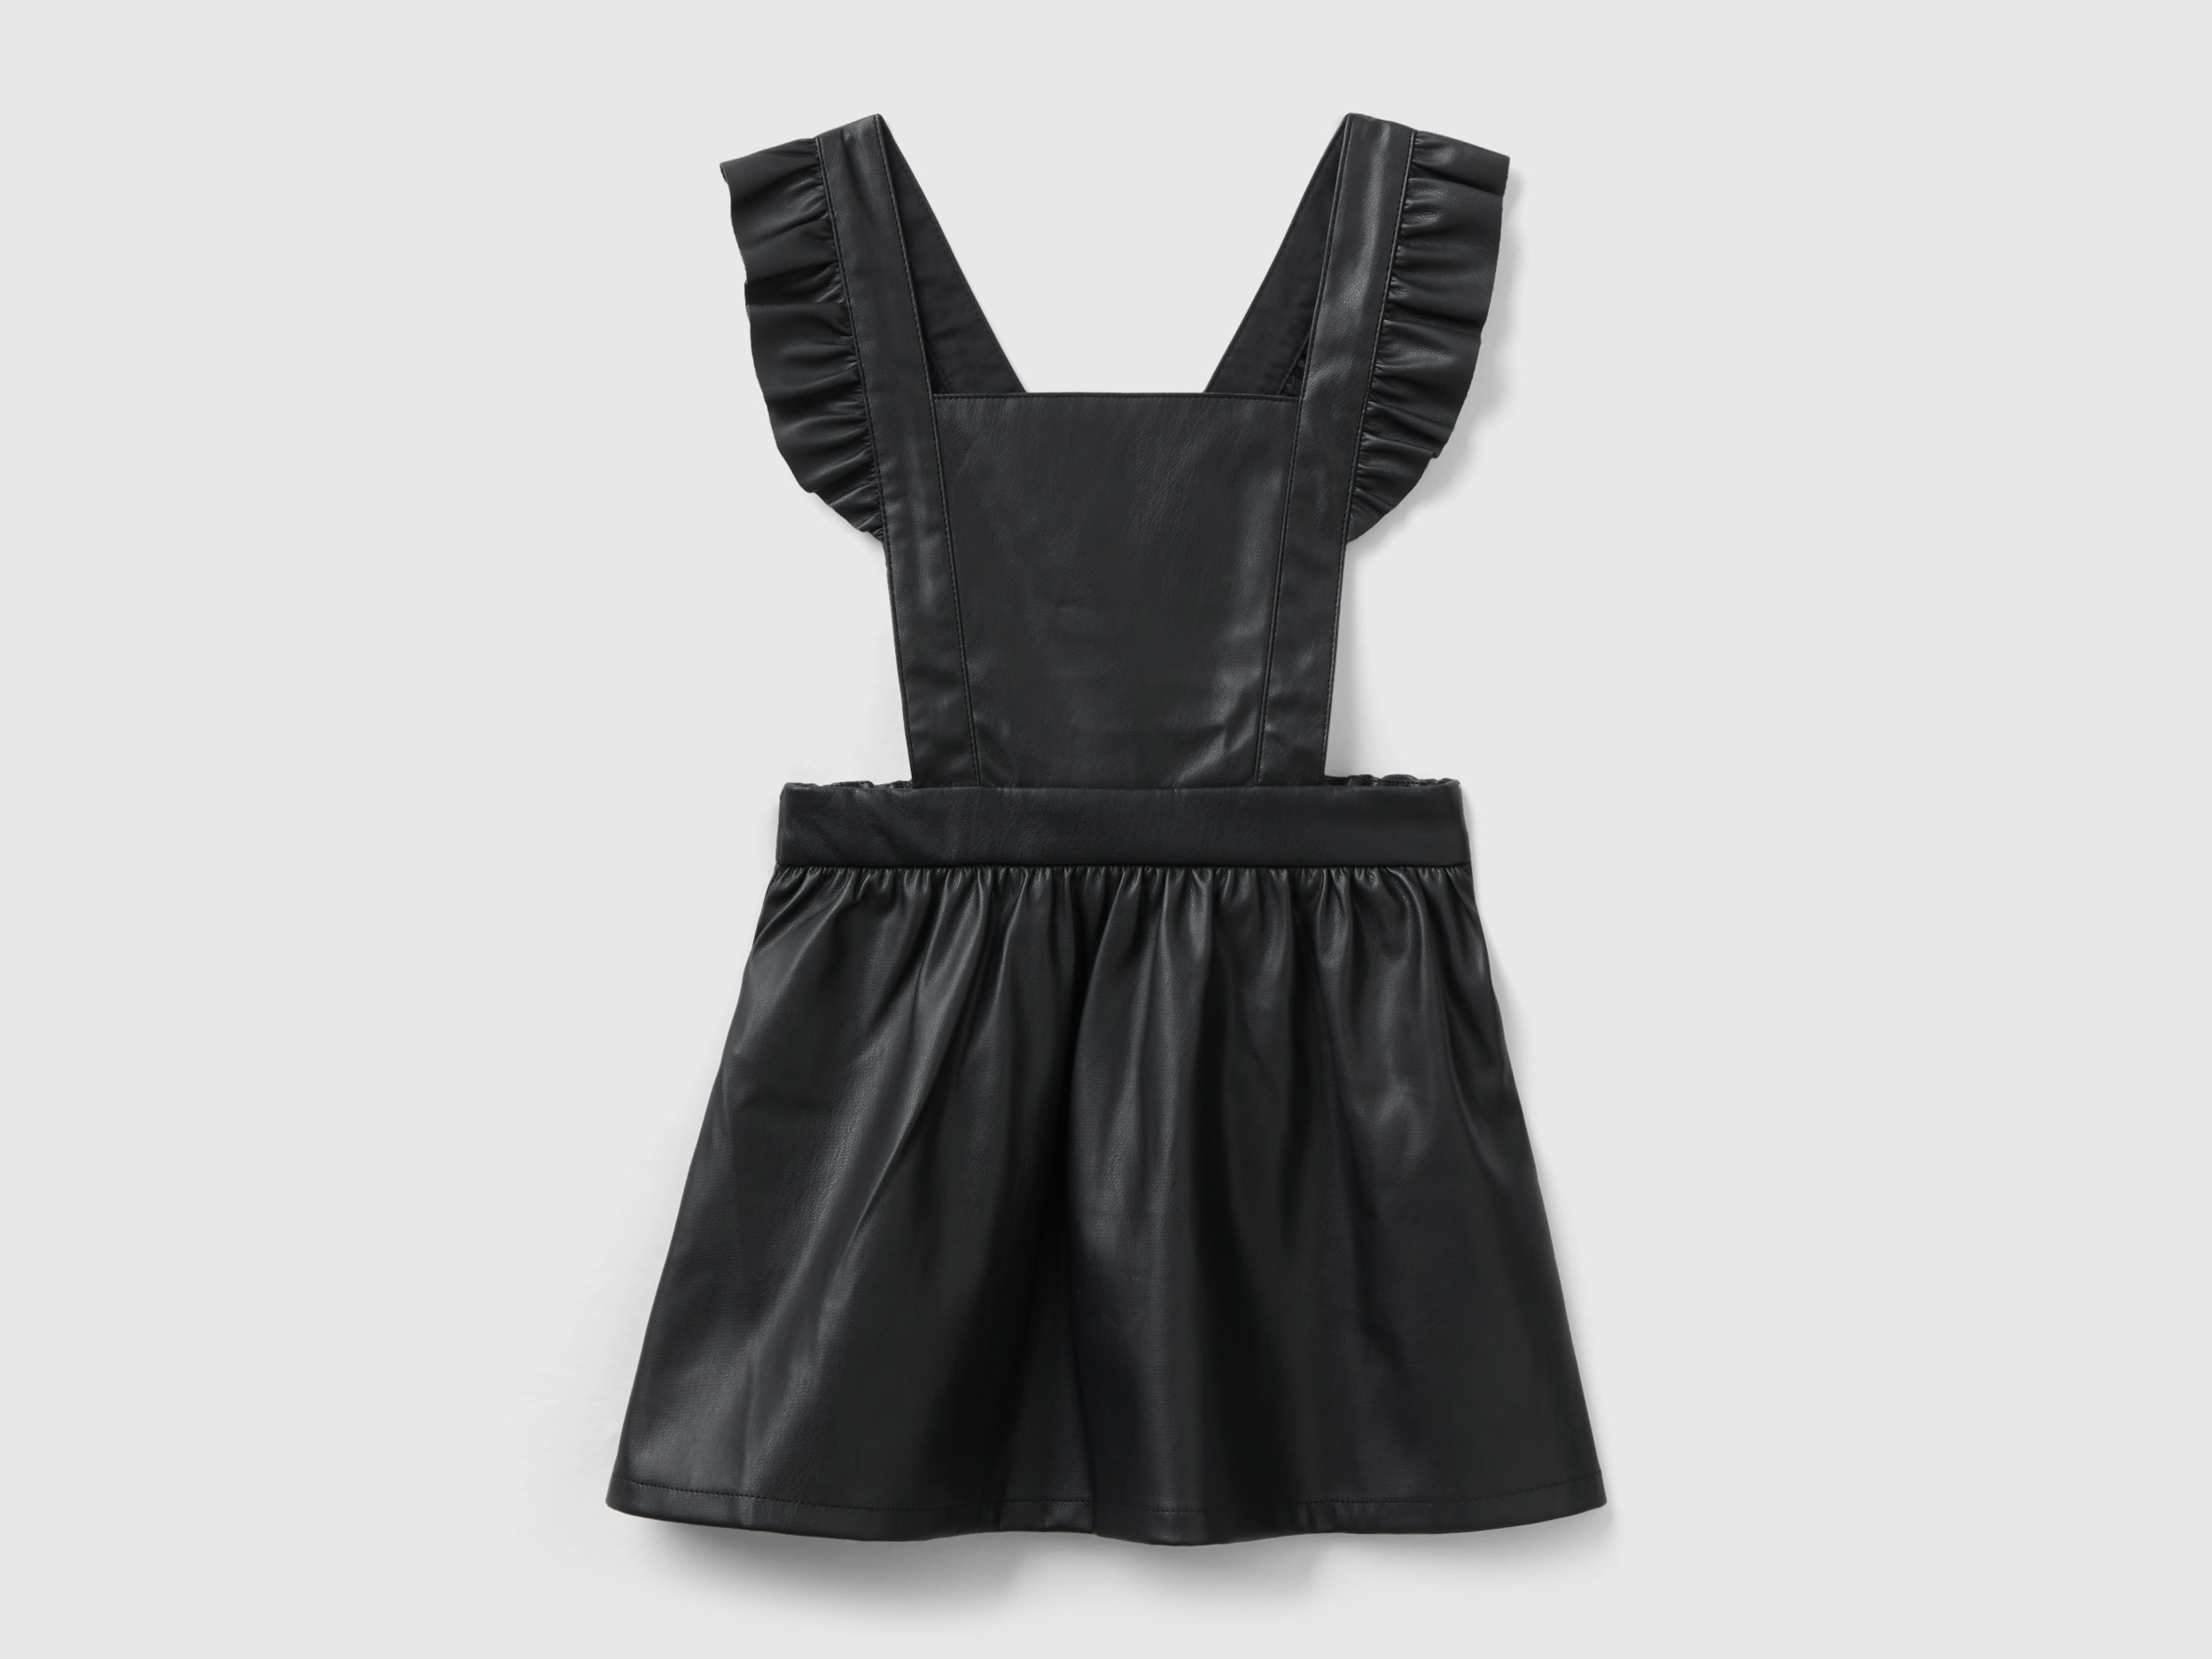 Benetton, Overall Skirt In Imitation Leather Fabric, size 3-4, Black, Kids